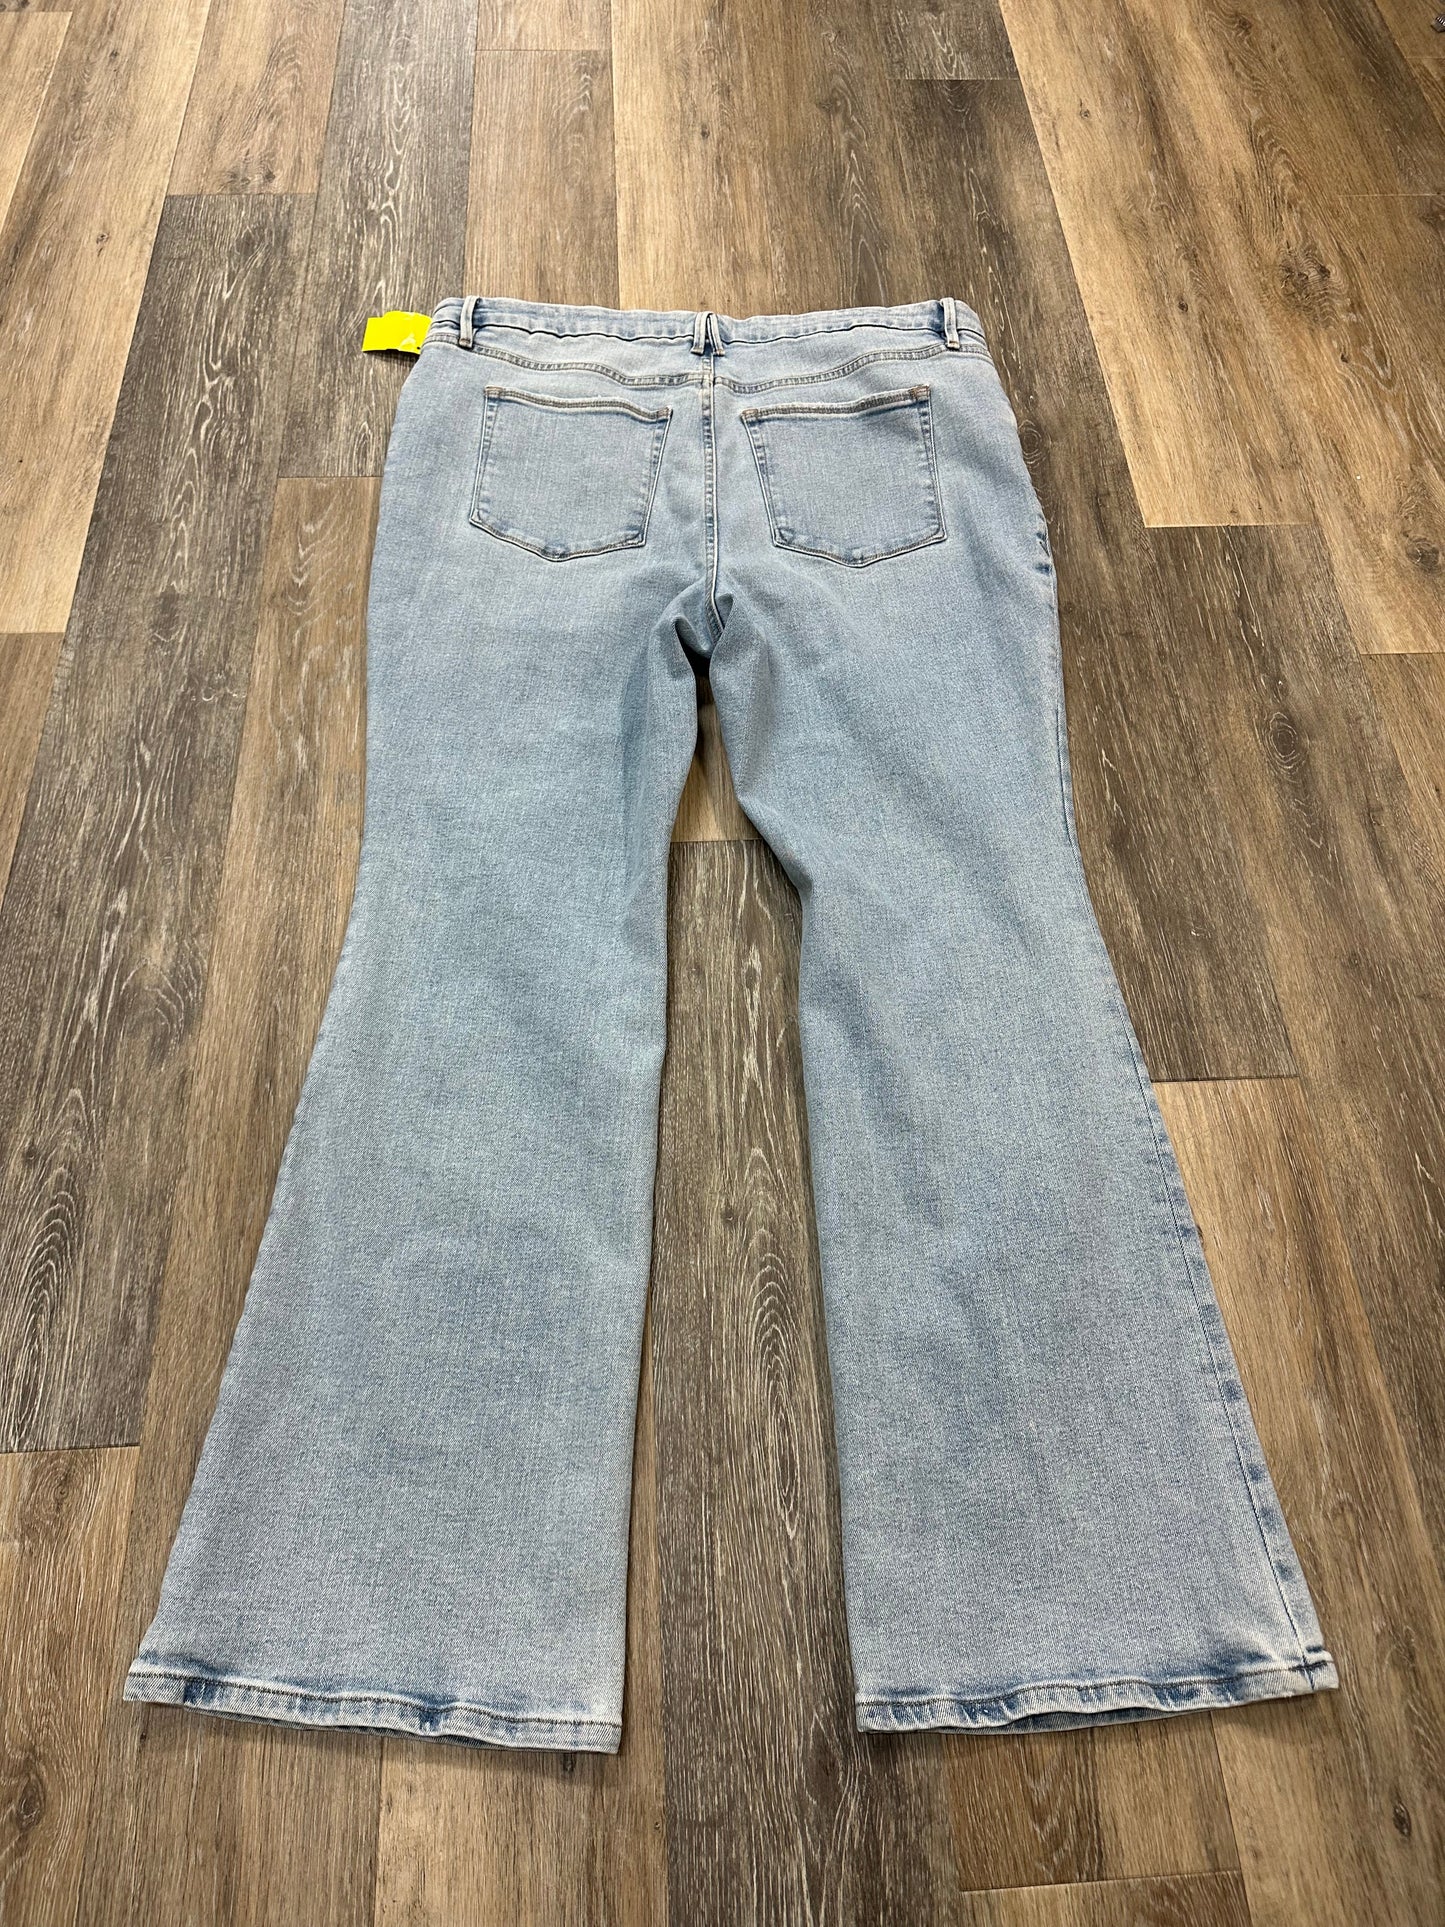 Jeans Relaxed/boyfriend By Good American  Size: 20